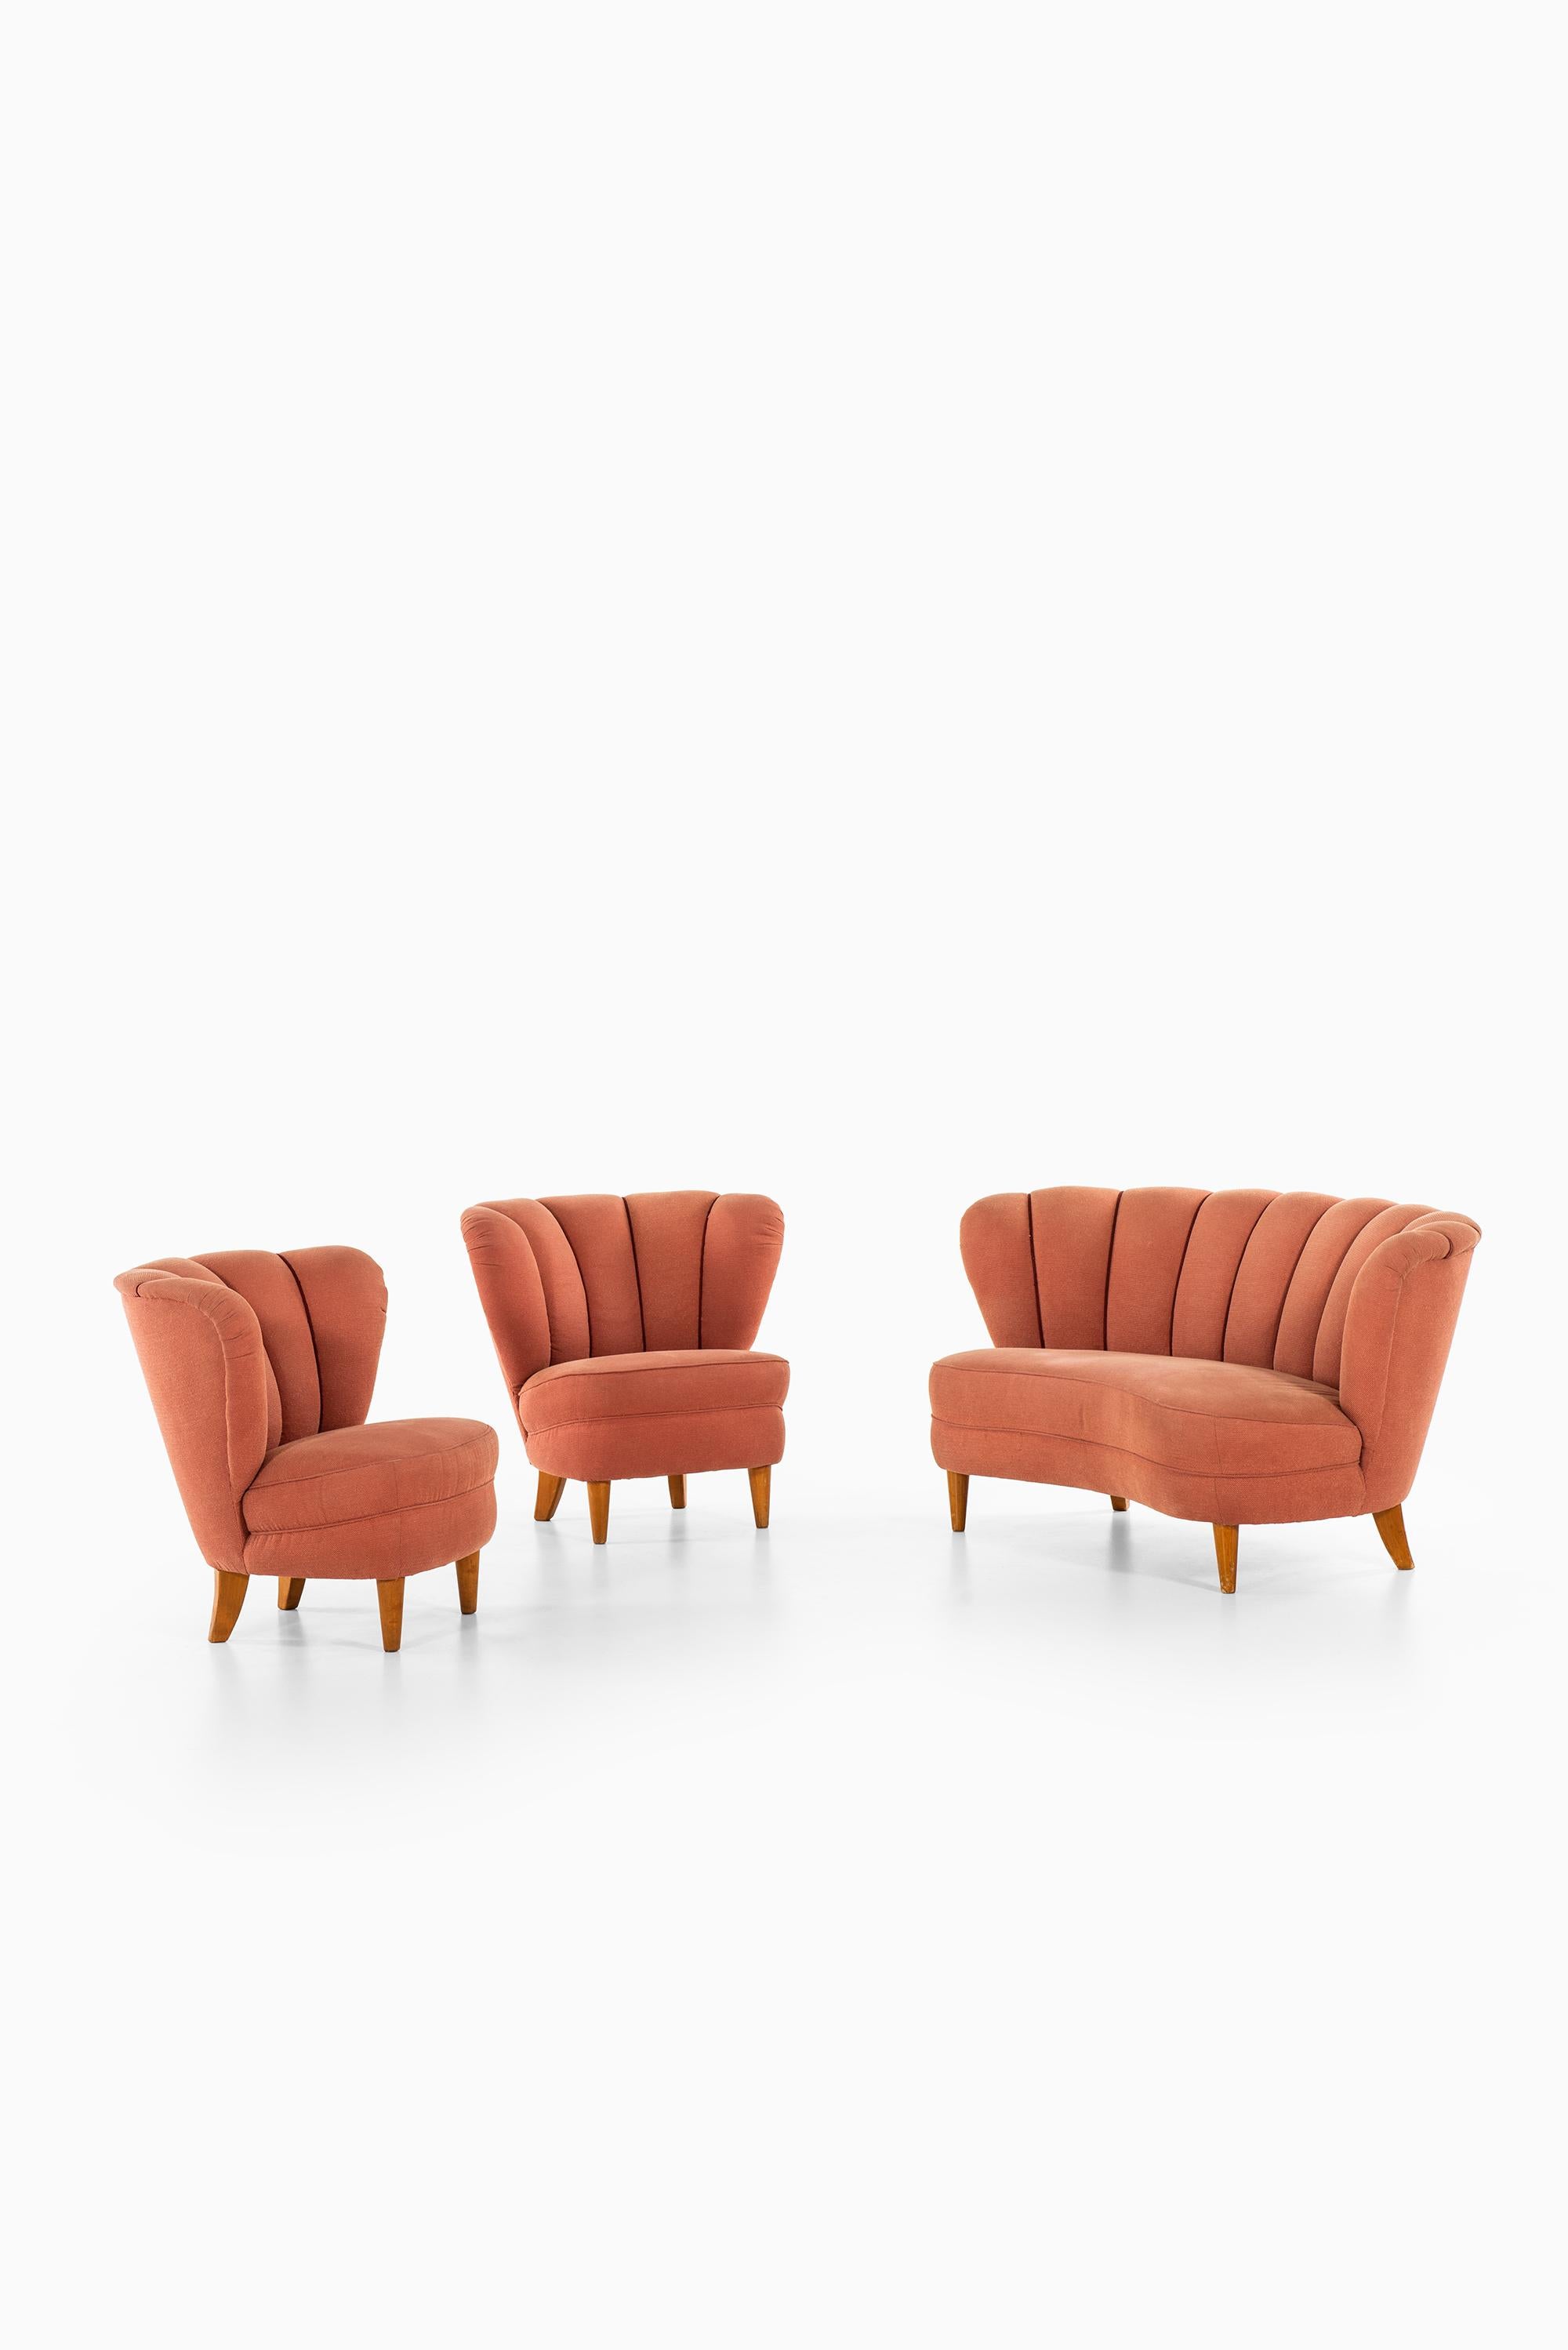 Rare seating group in the manner of Otto Schulz. Consisting of a sofa and a pair of easy chairs. Produced in Sweden.

Dimensions sofa (W x D x H) 160 x 85 x 76 cm, SH 40 cm
Dimensions easy chairs (W x D x H) 82 x 72 x 74 cm, SH 40 cm.